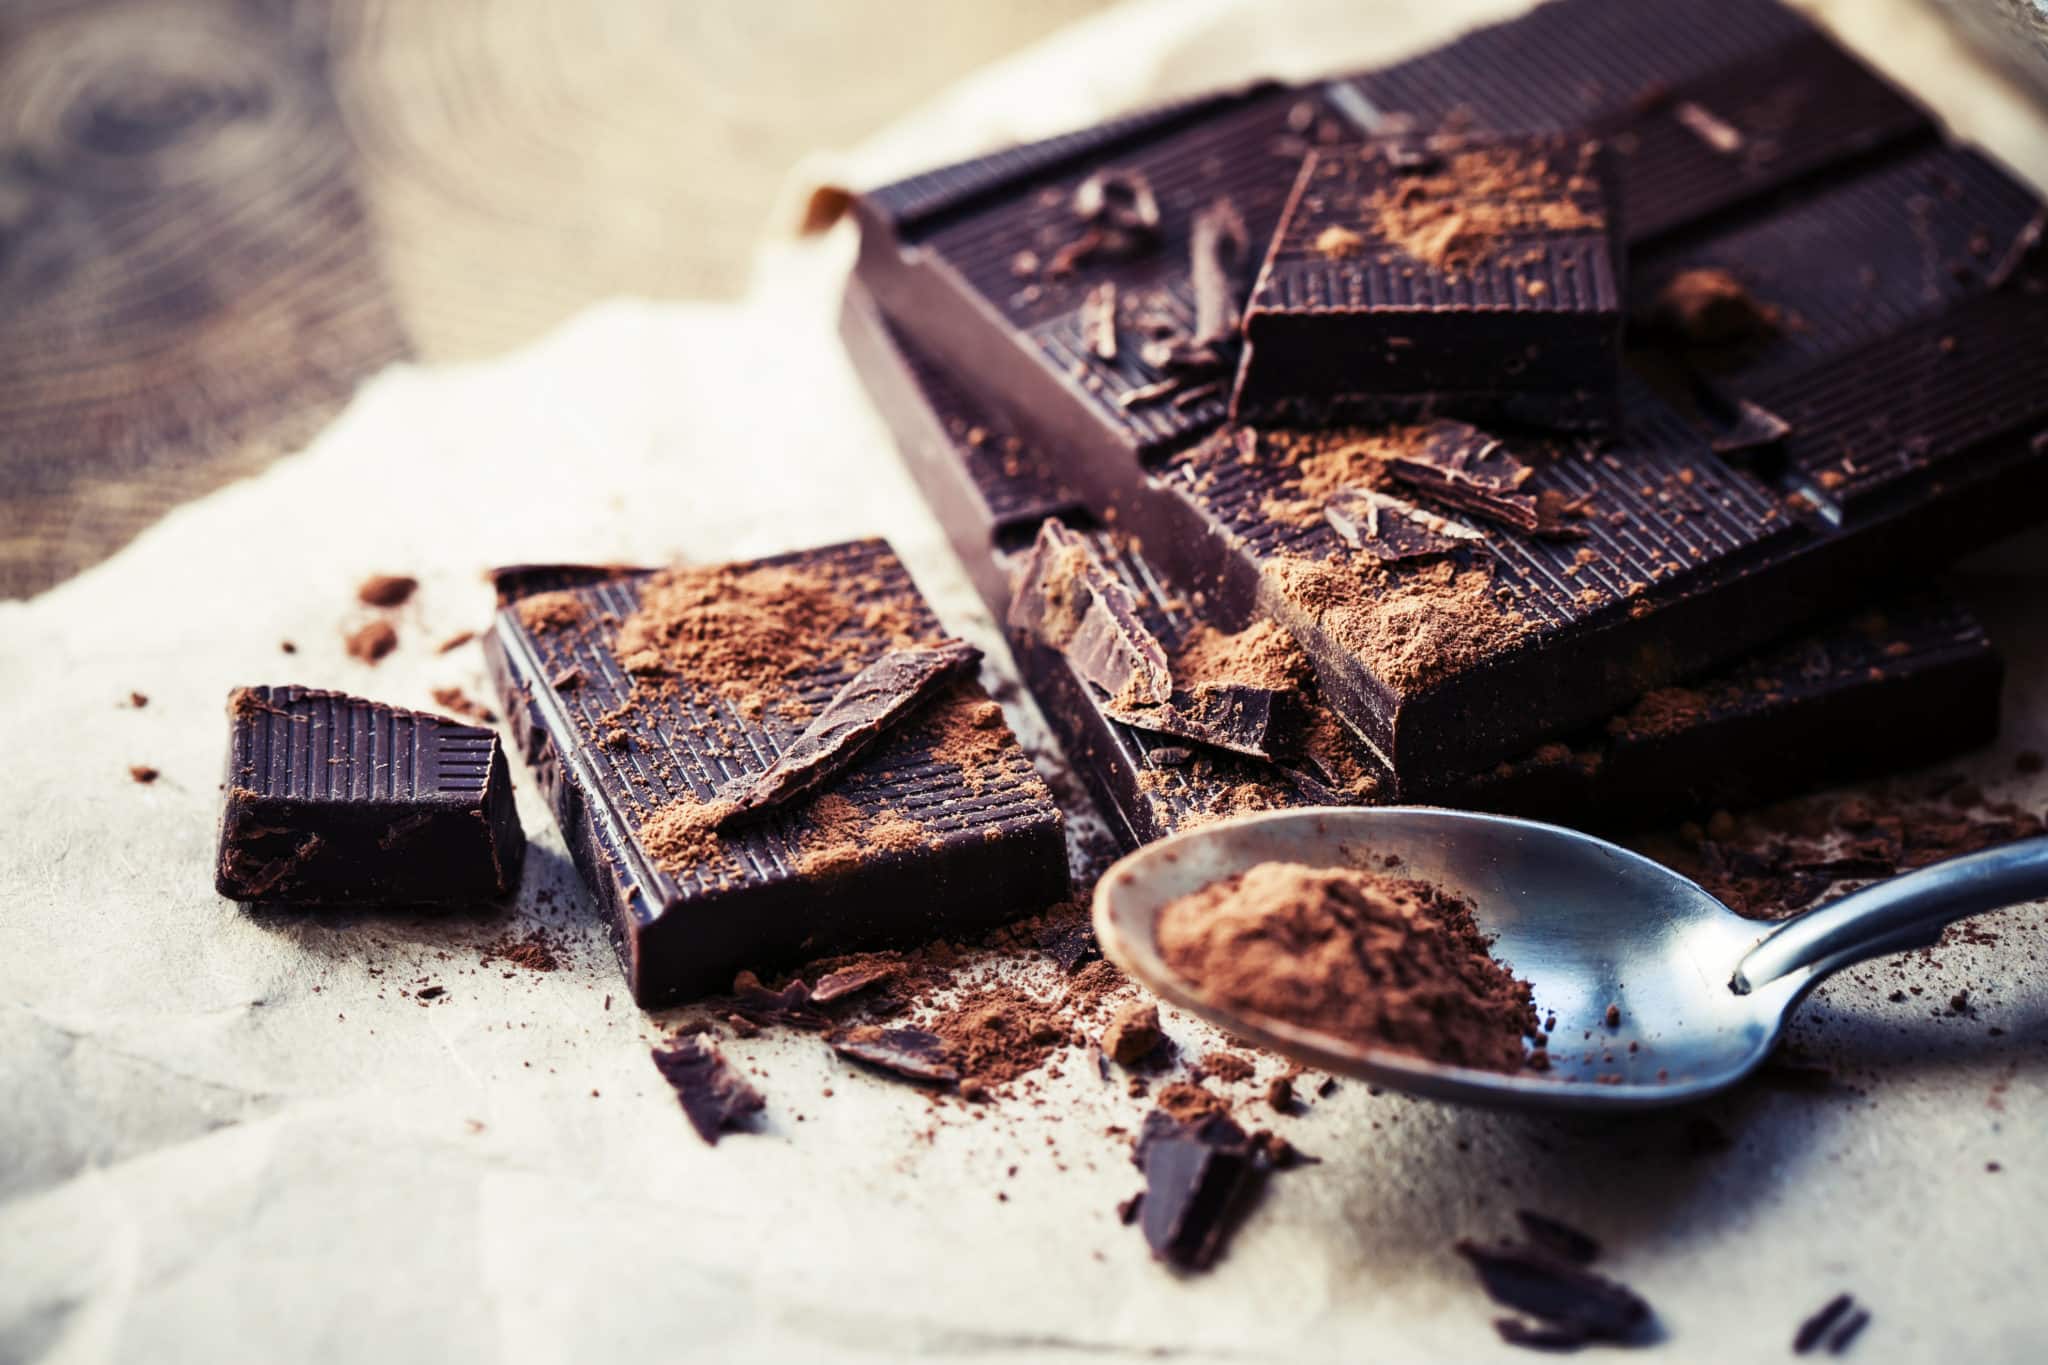 Did you know that eating dark chocolate can lower your cholesterol?